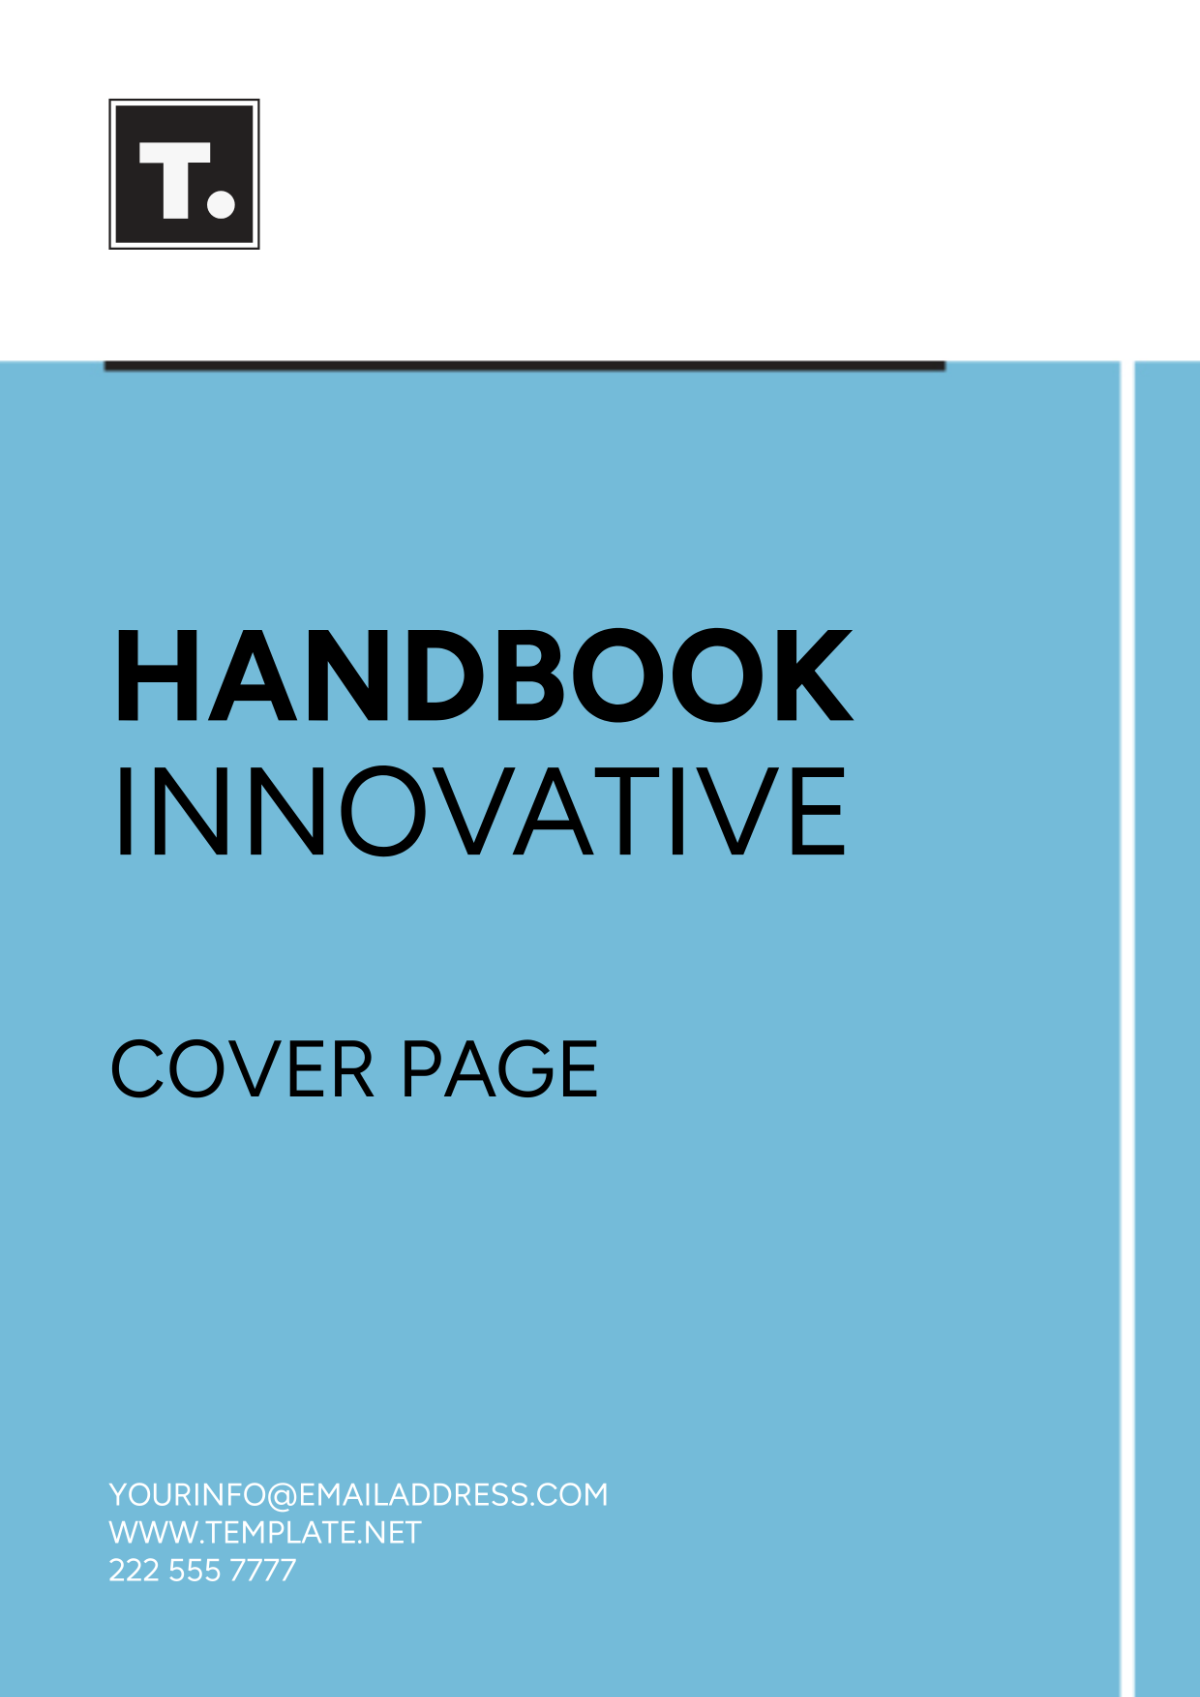 Handbook Innovative Cover Page Template